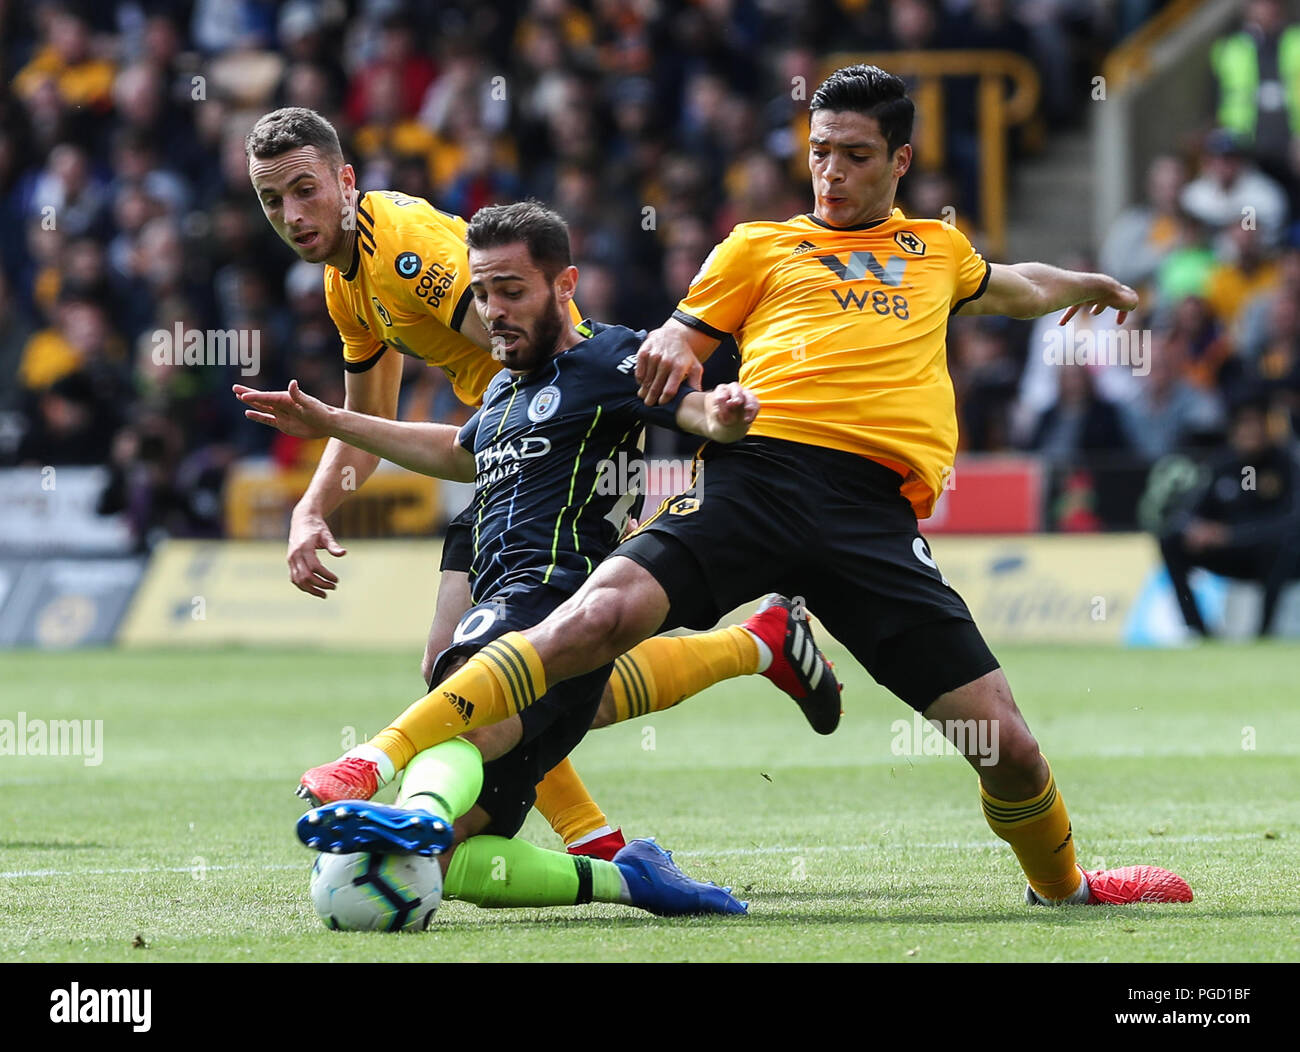 Wolverhampton, UK. 25th Aug 2018. Diogo Jota and Raul Jiminez of Wolverhampton Wanderers crowd out Bernado Silva of Manchester City during the Premier League match between Wolverhampton Wanderers and Manchester City at Molineux on August 25th 2018 in Wolverhampton, England. (Photo by John Rainford/phcimages.com) Credit: PHC Images/Alamy Live News Stock Photo